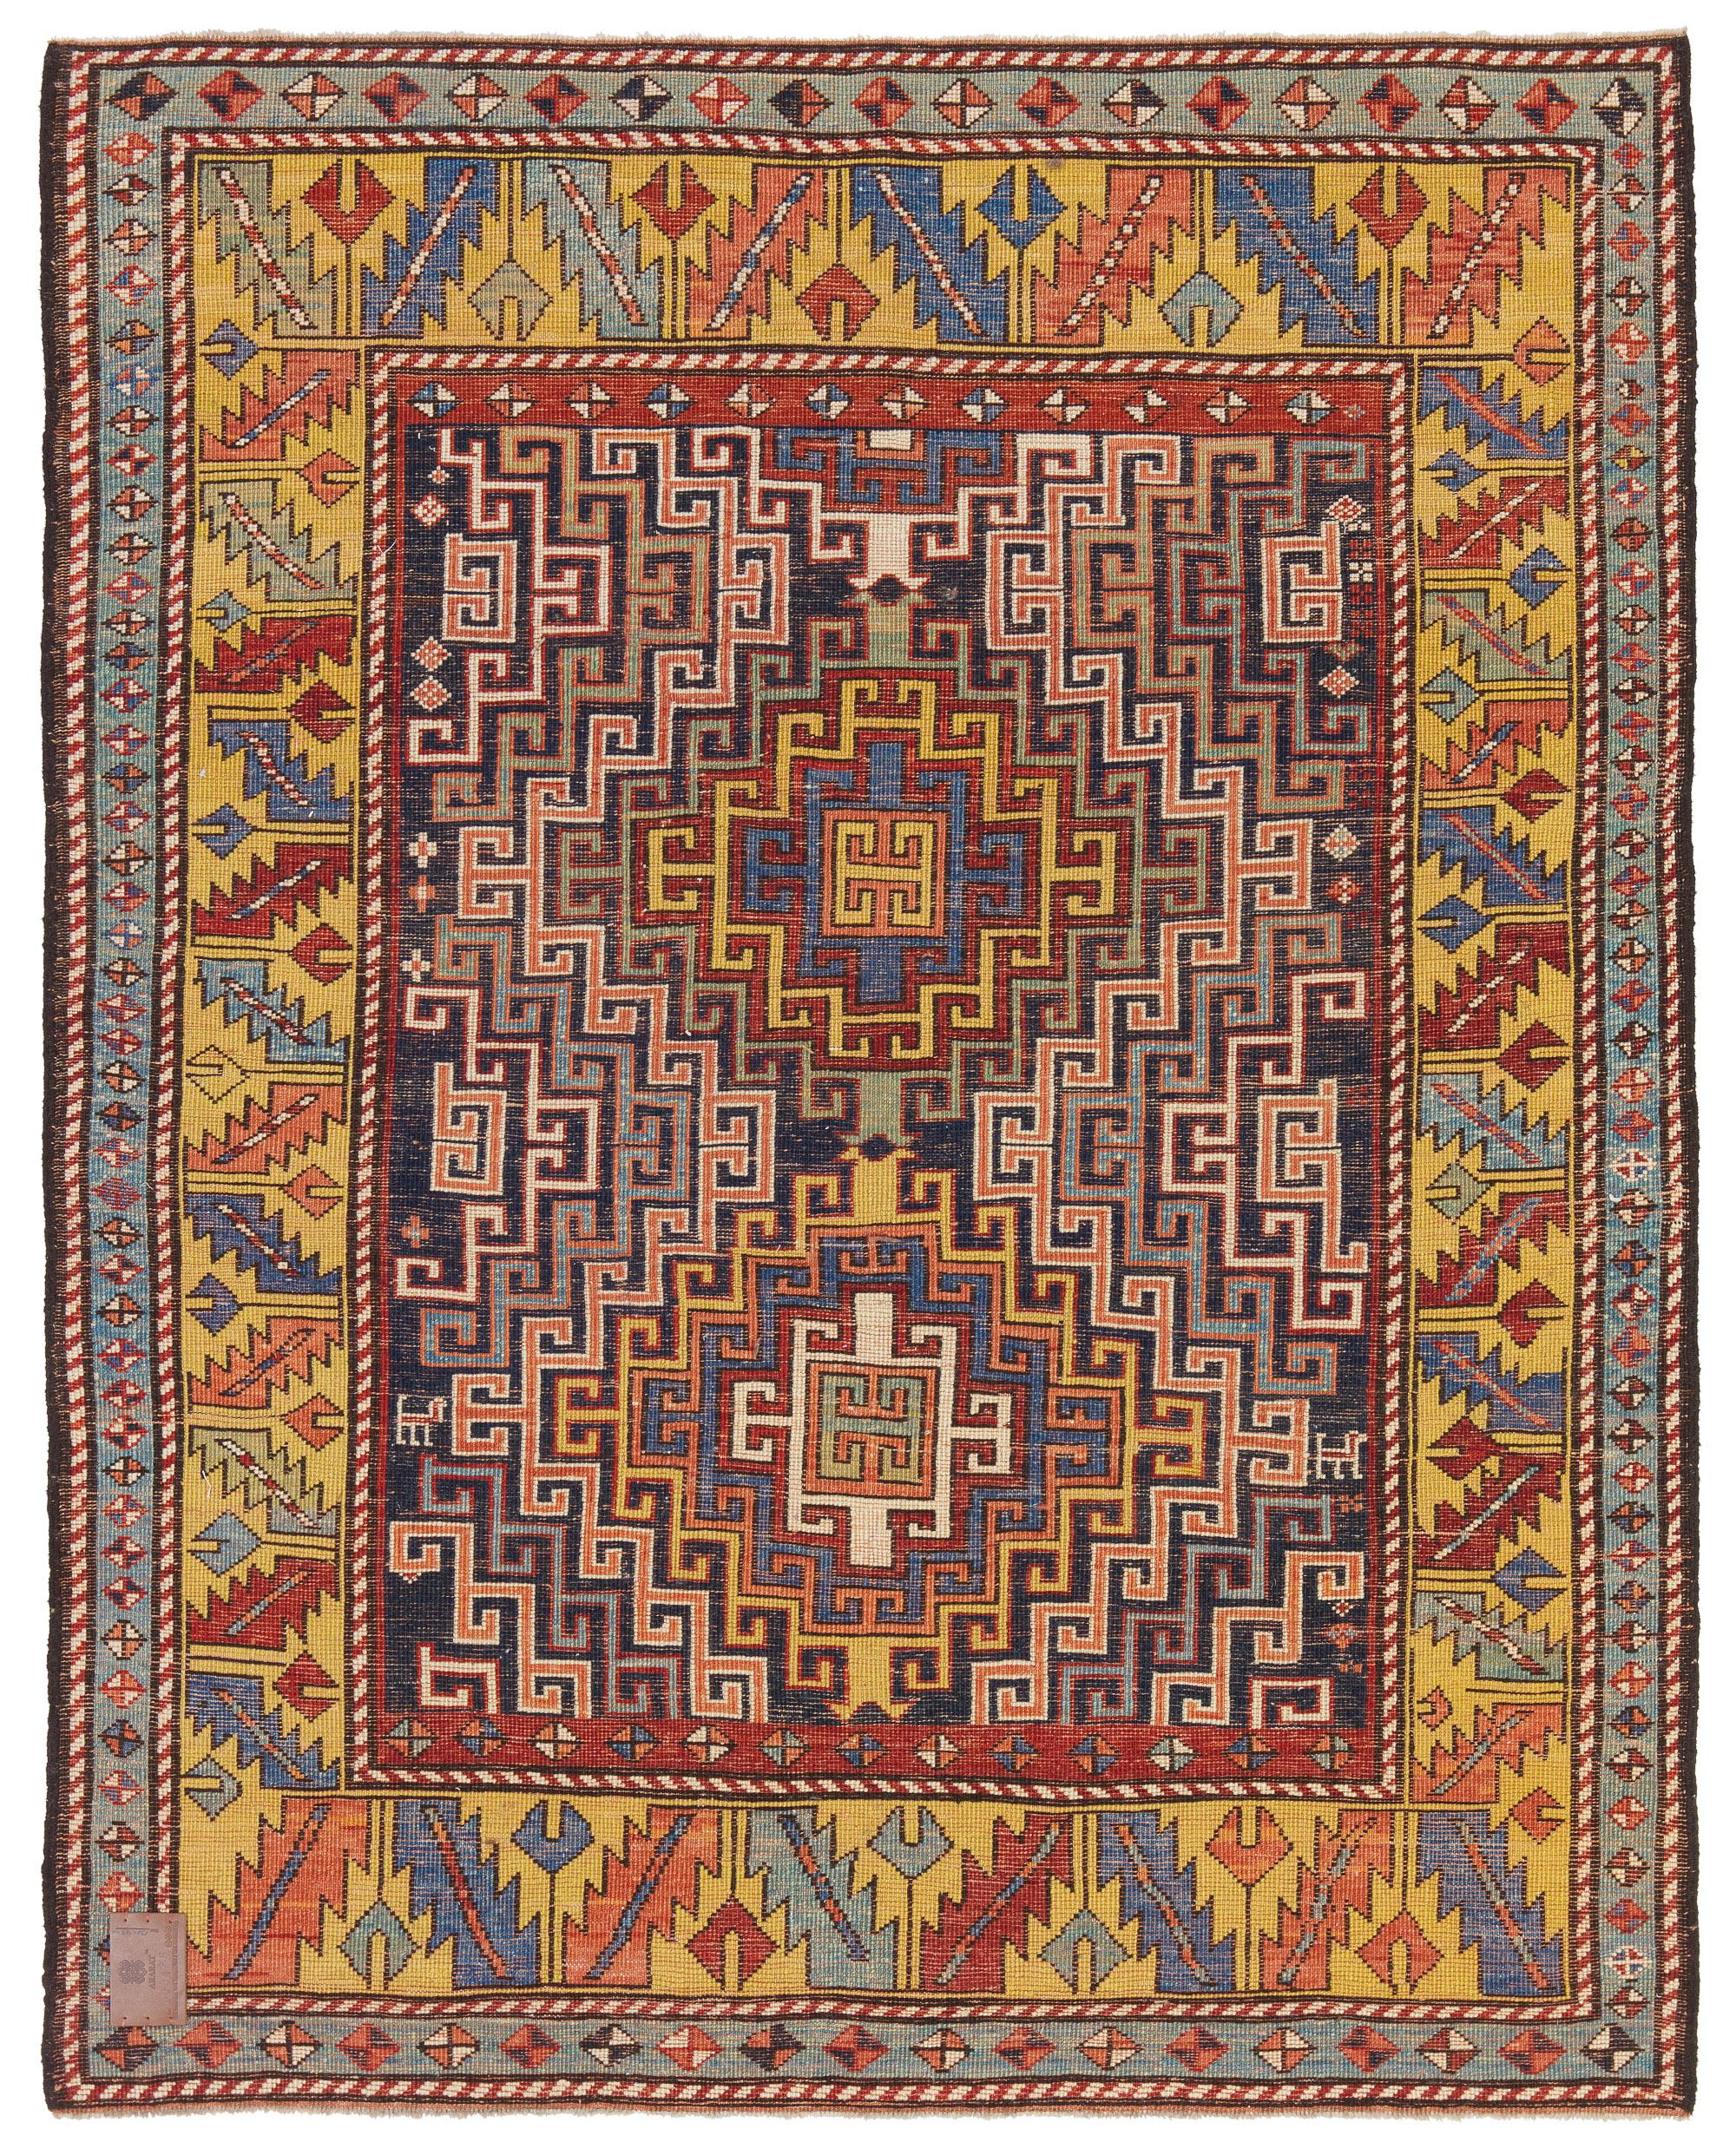 This is a complete hooked field with double medallions rug from the late 19th century, Kazak region, Caucasus area. A striking field design features two medallions each with concentric hook motifs, with a double latch-hooks design in the center of